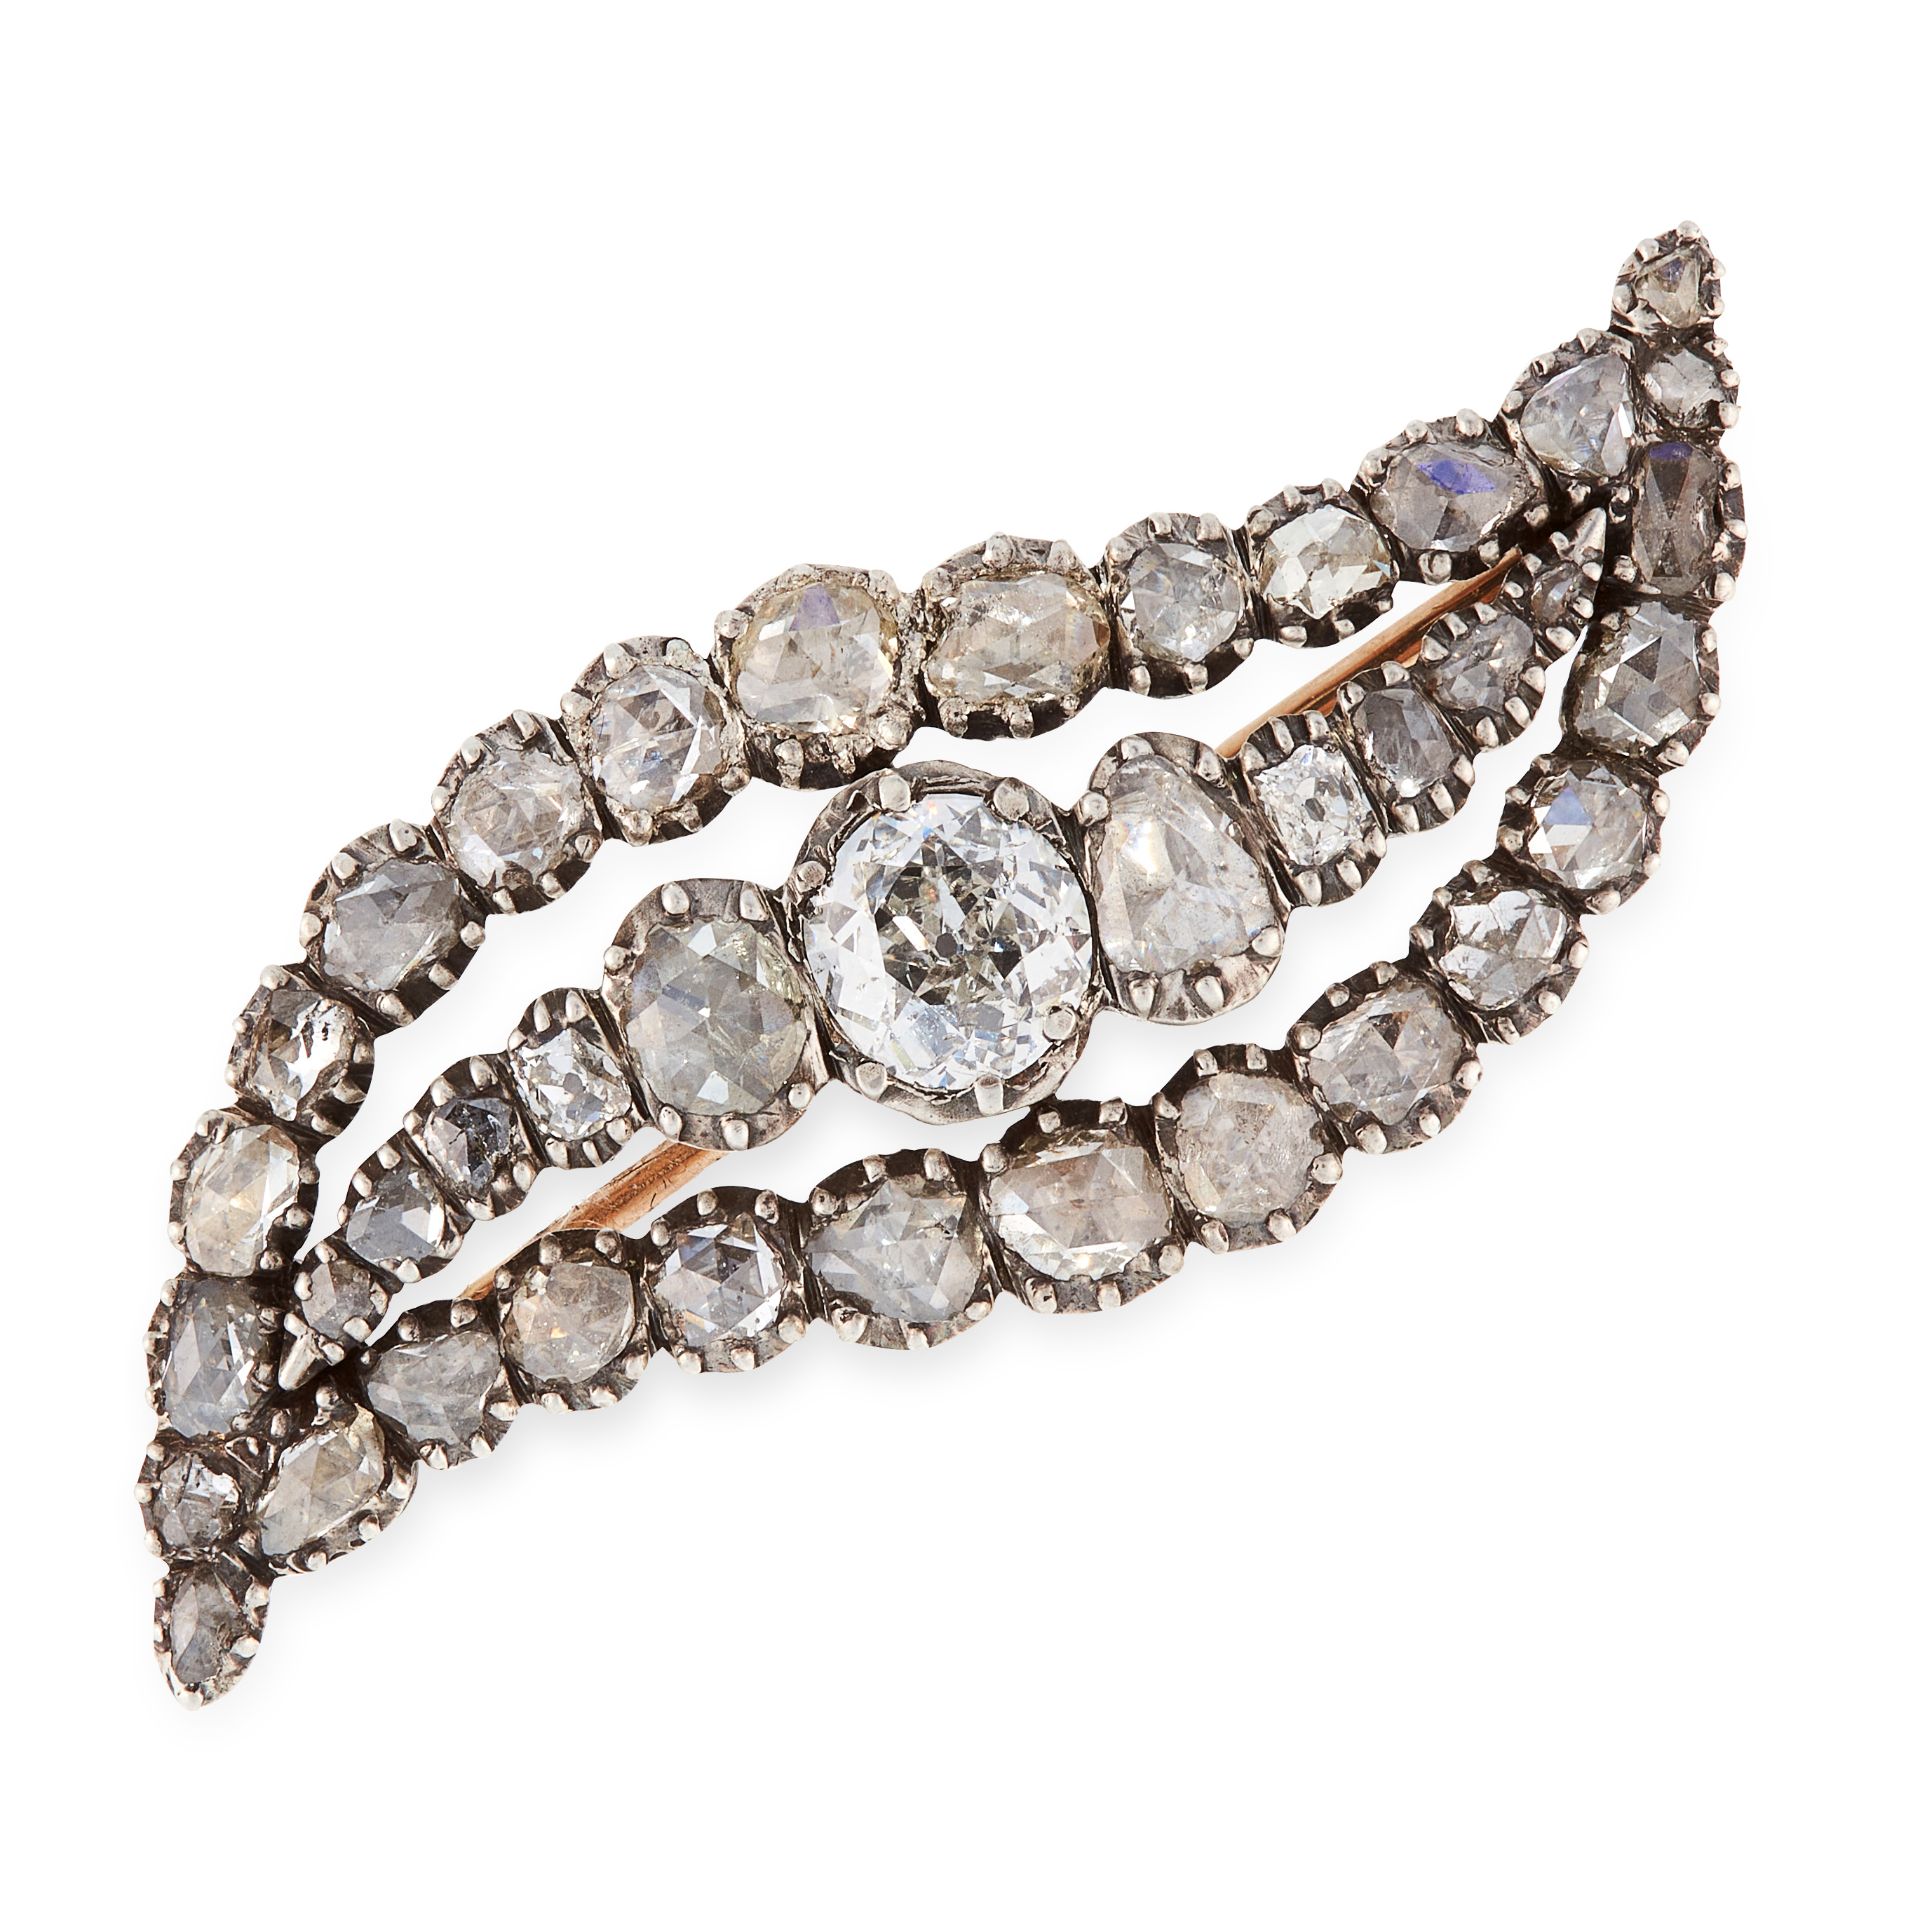 AN ANTIQUE DIAMOND BROOCH, 19TH CENTURY in yellow gold and silver, designed as an eye, jewelled with